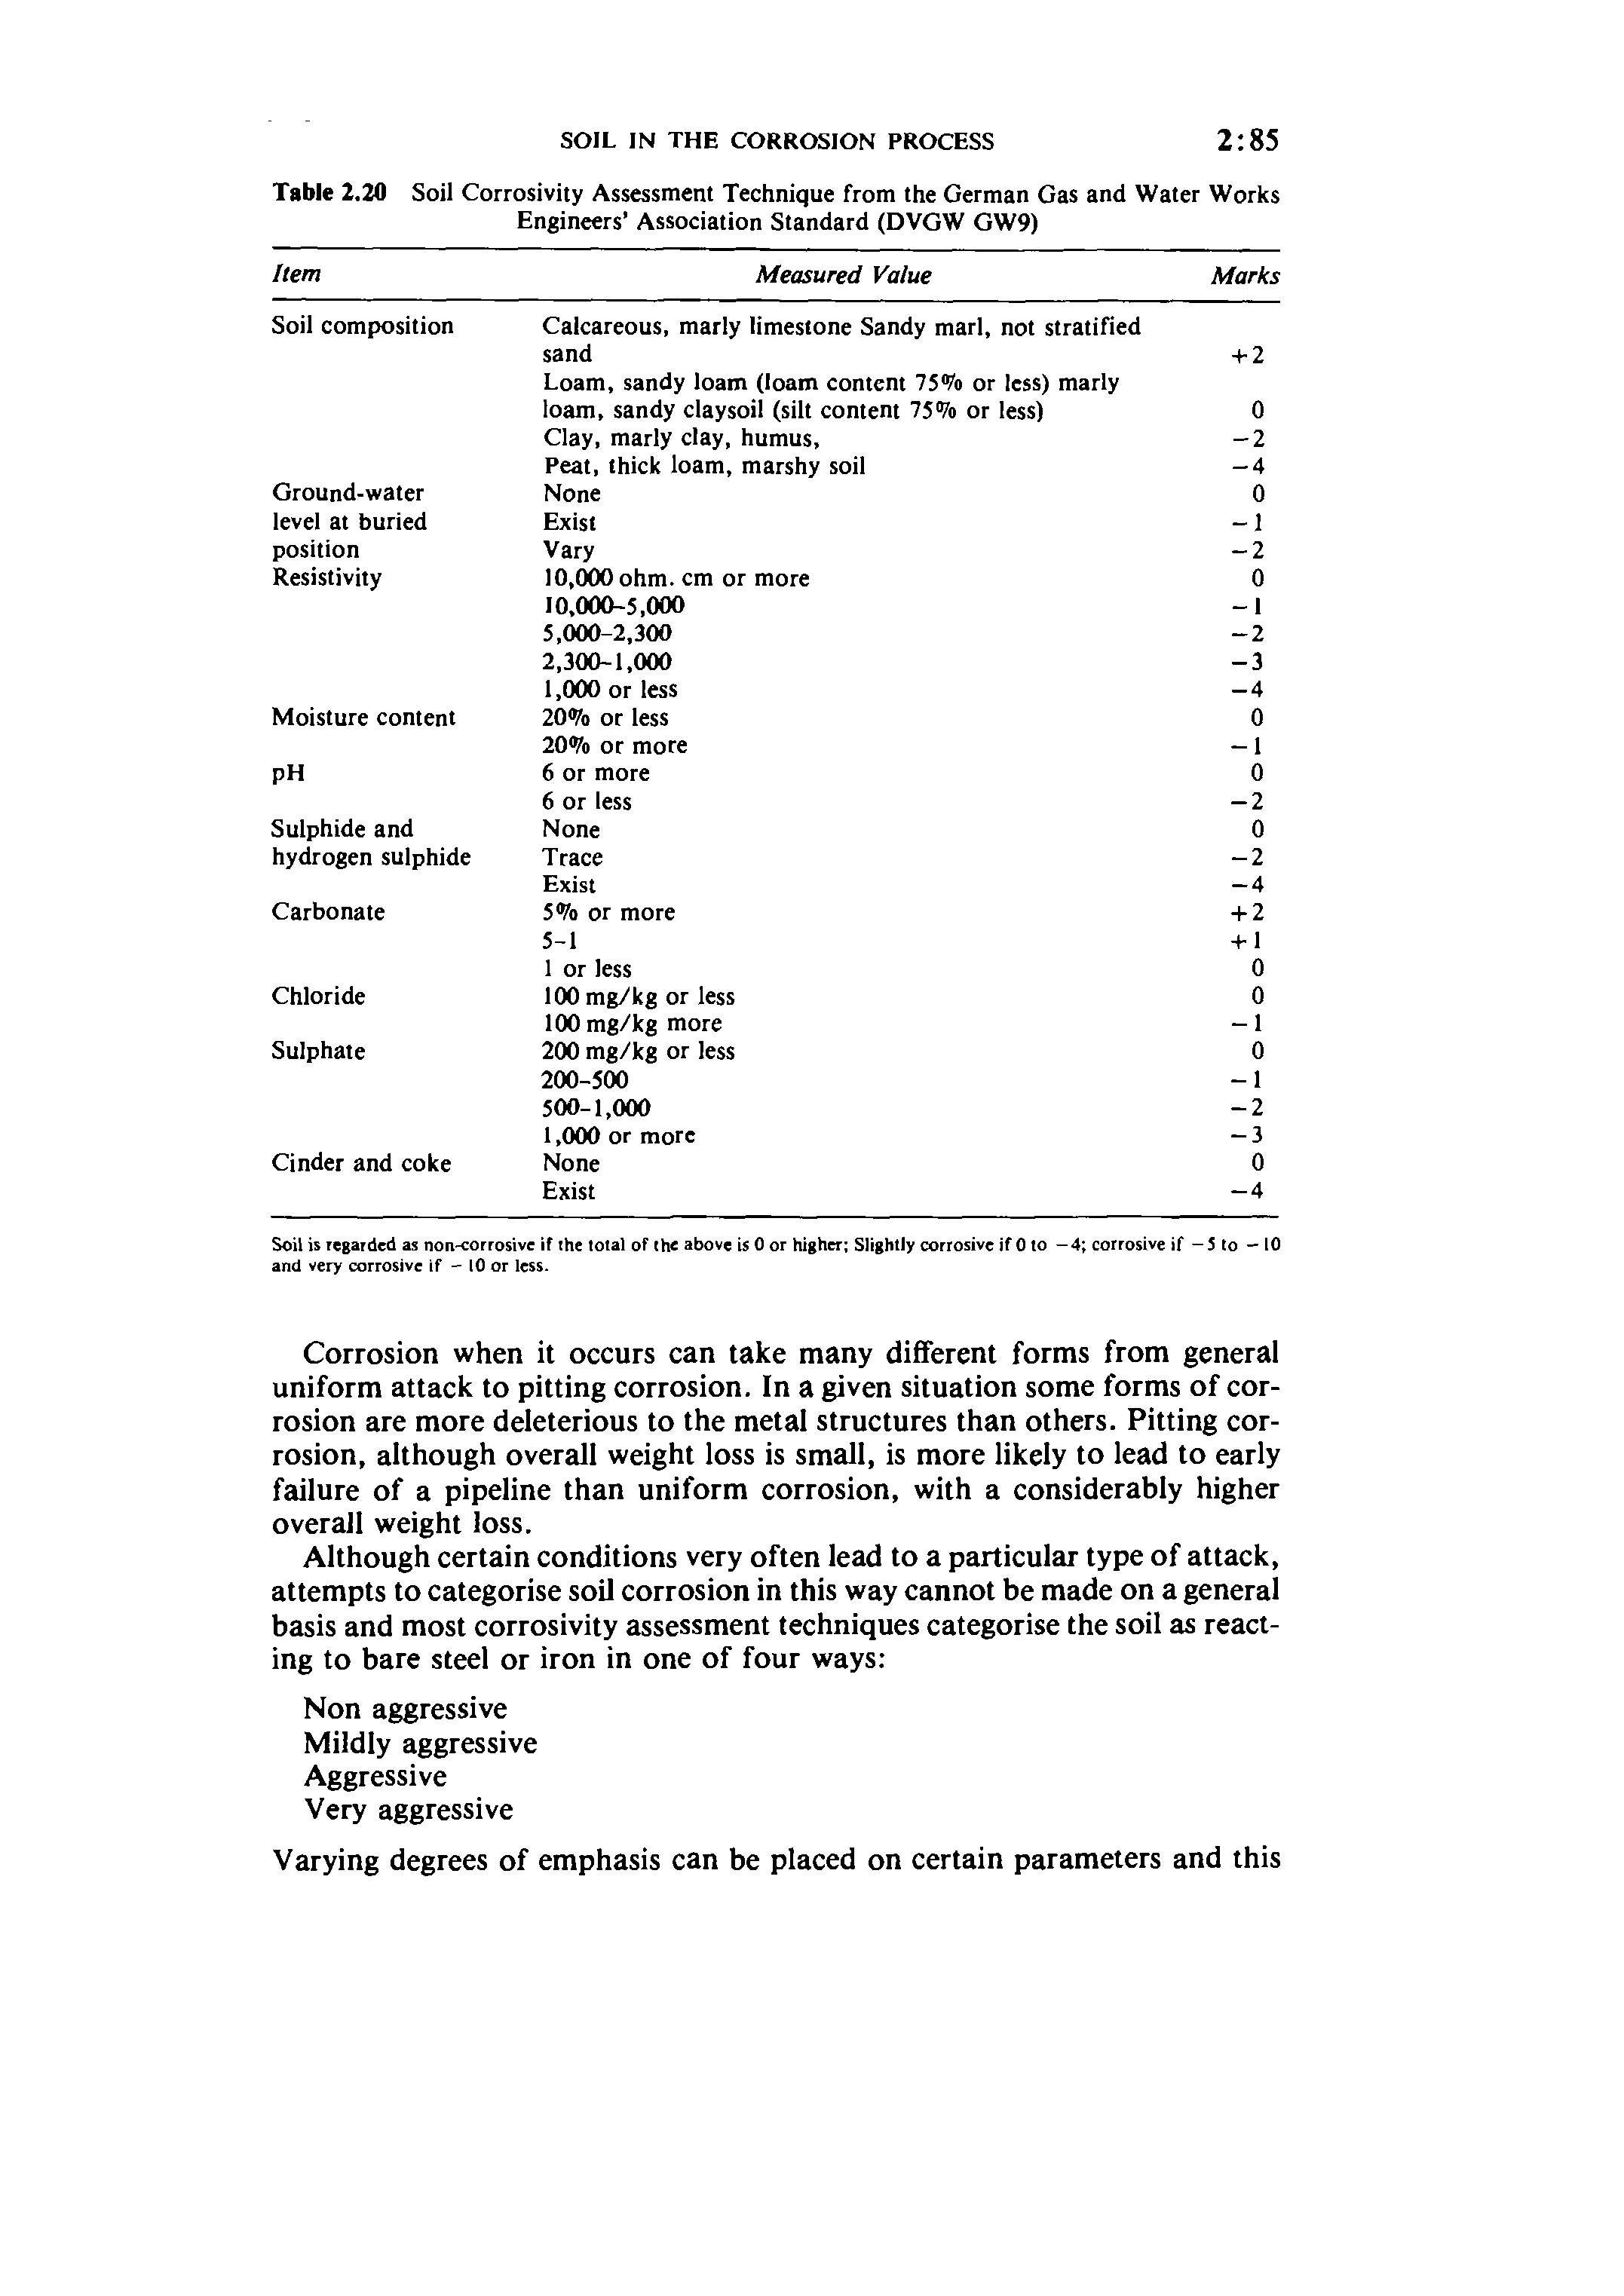 Table 2.20 Soil Corrosivity Assessment Technique from the German Gas and Water Works Engineers Association Standard (DVGW GW9)...